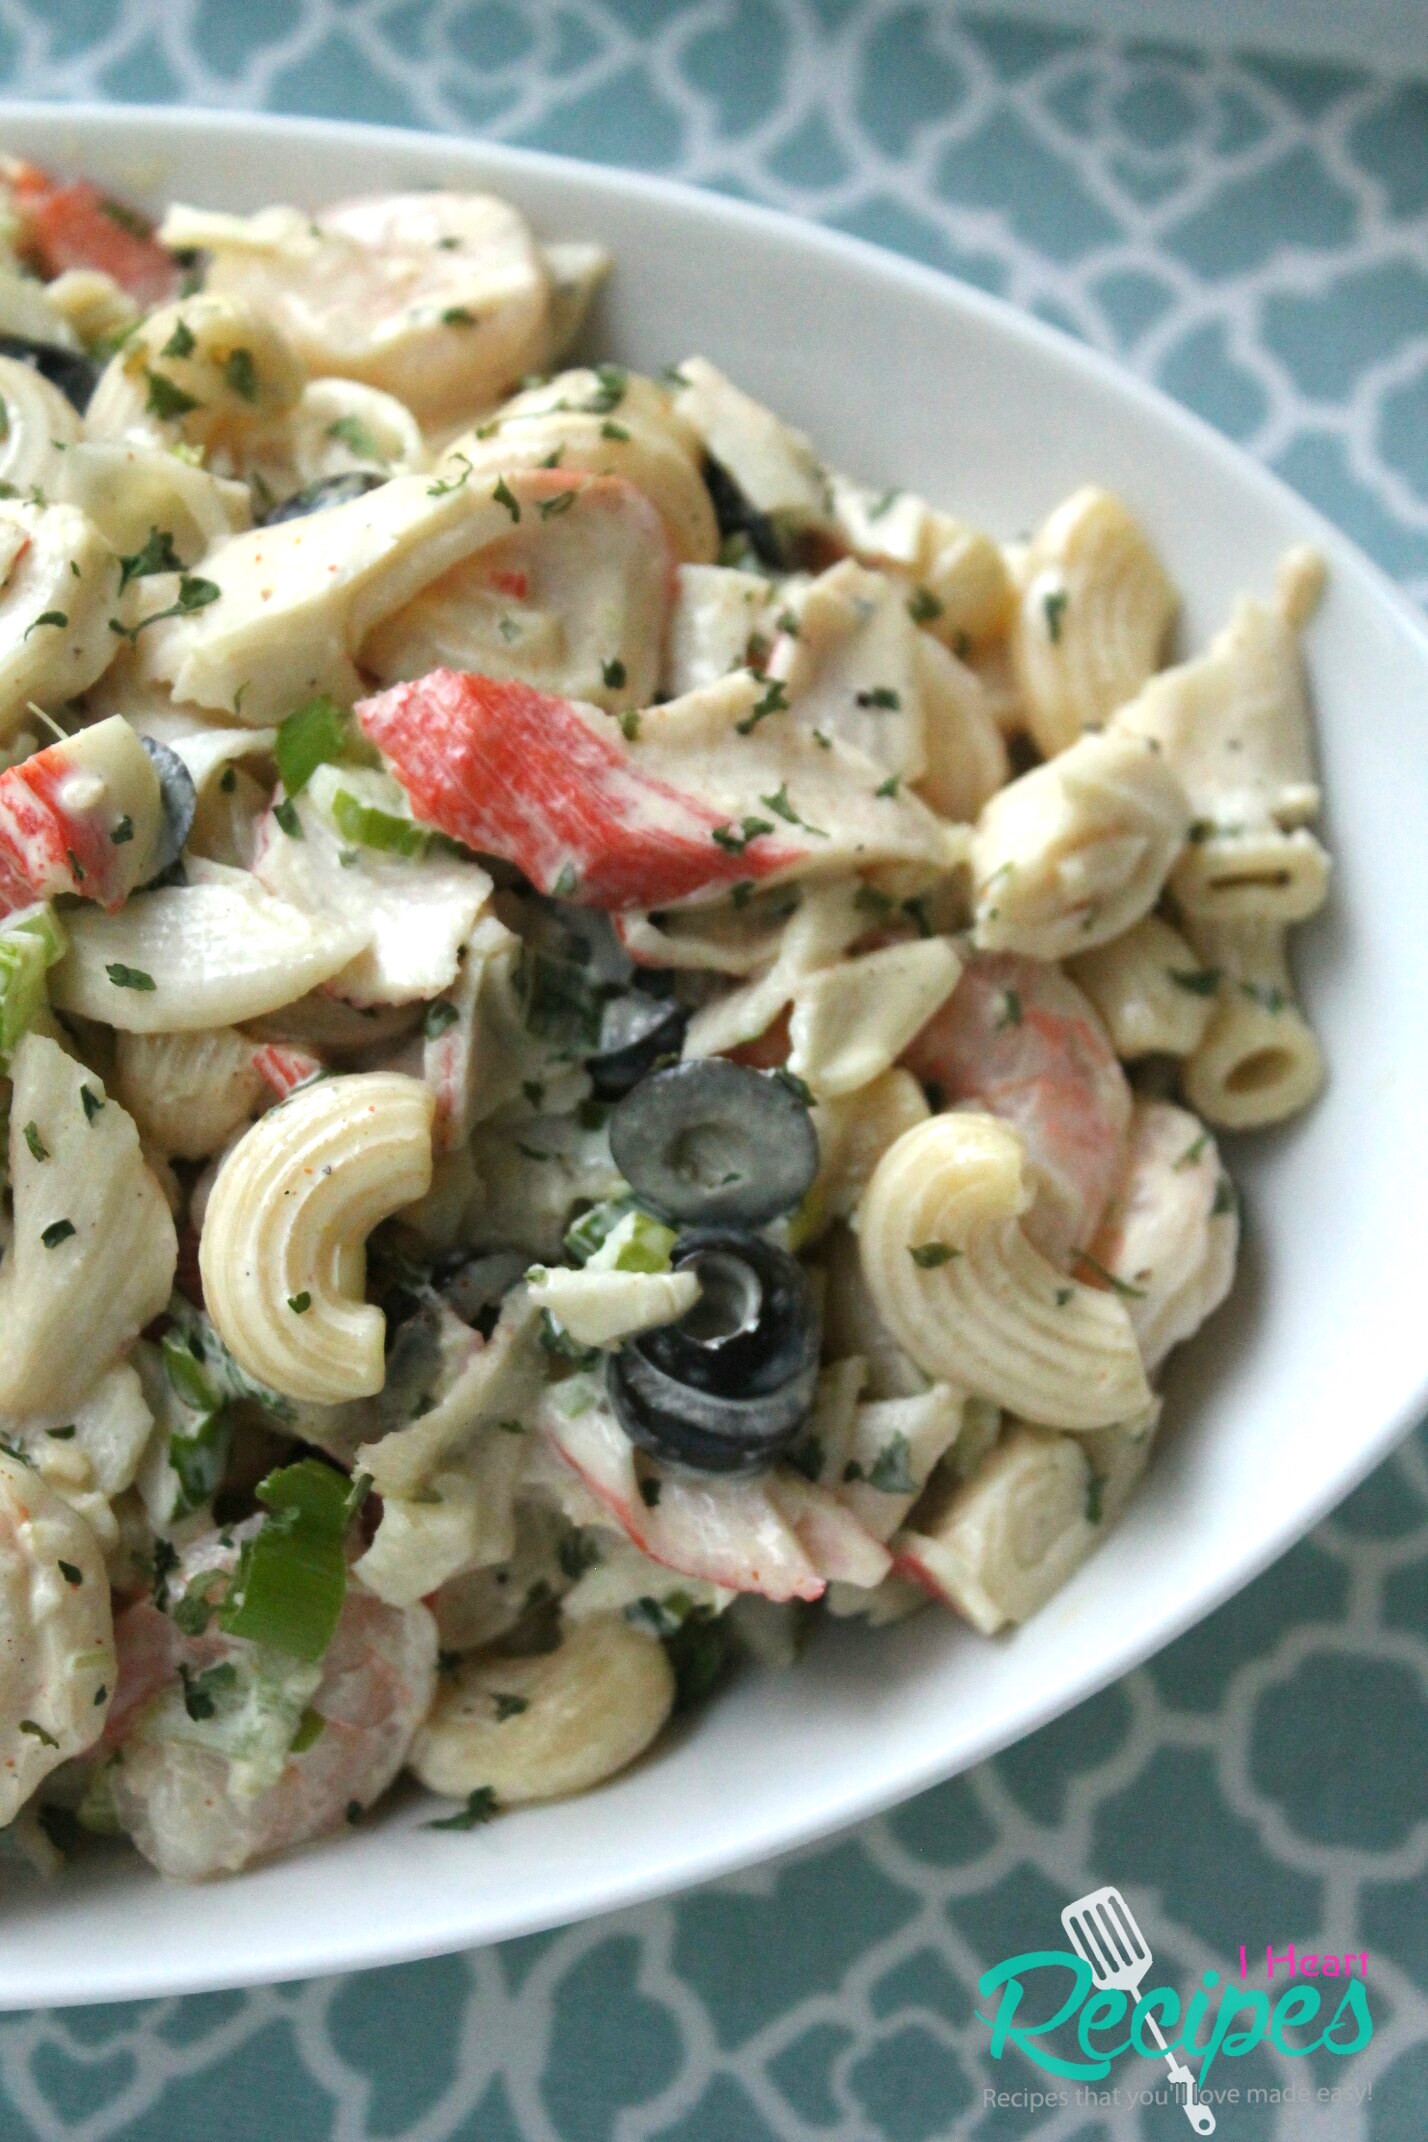 A close-up image of a large bowl of seafood macaroni salad, made with crab, shrimp, macaroni pasta, olives, celery, and onions mixed with a light and creamy dressing.